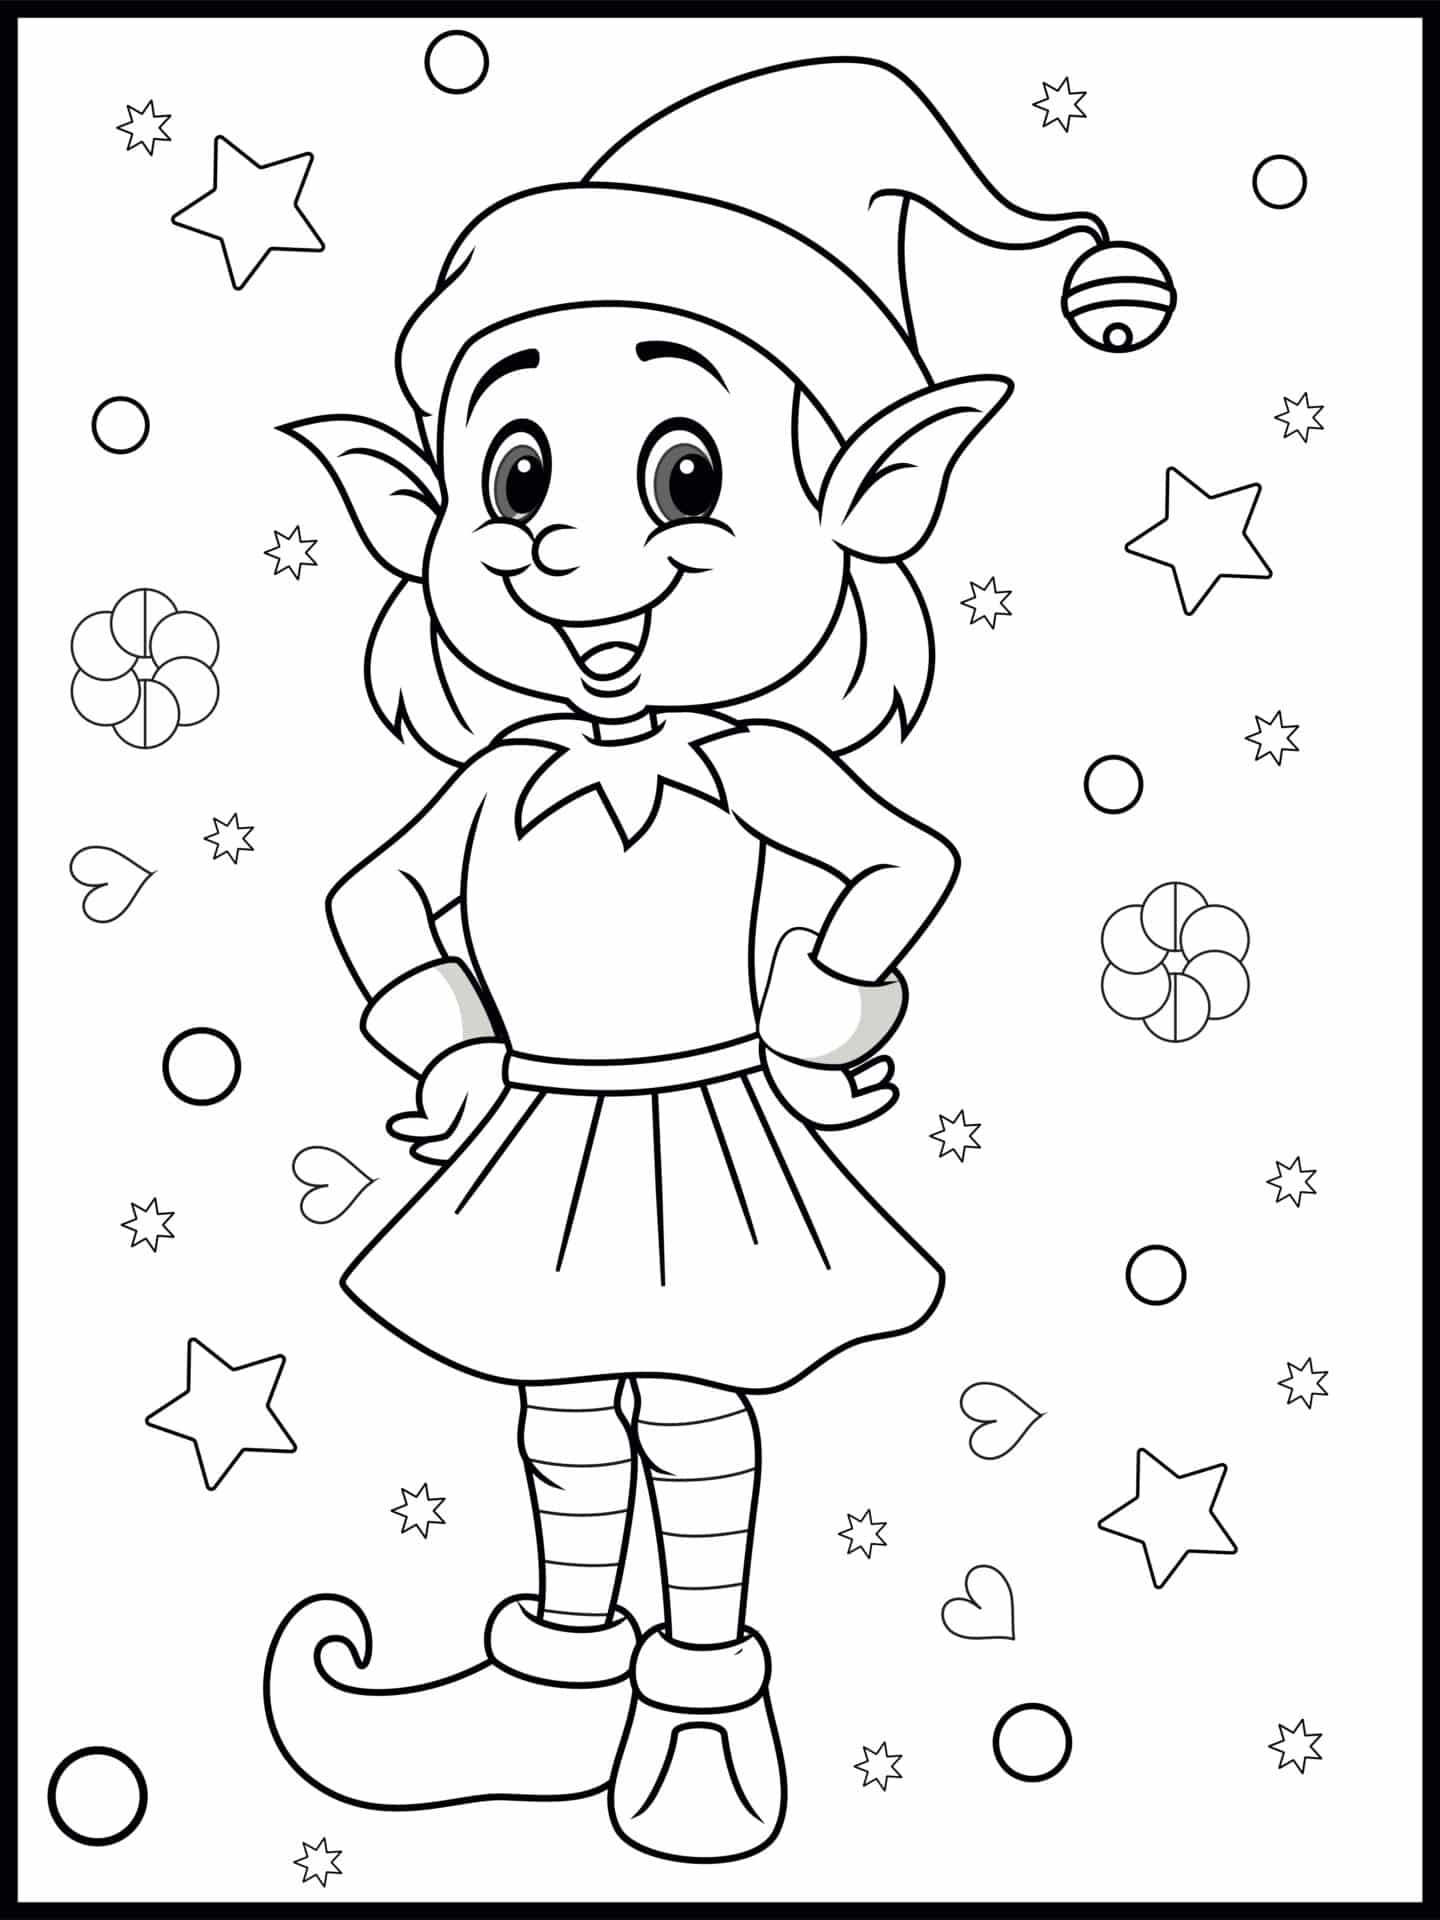 Christmas Coloring Pages Free Printable_51293